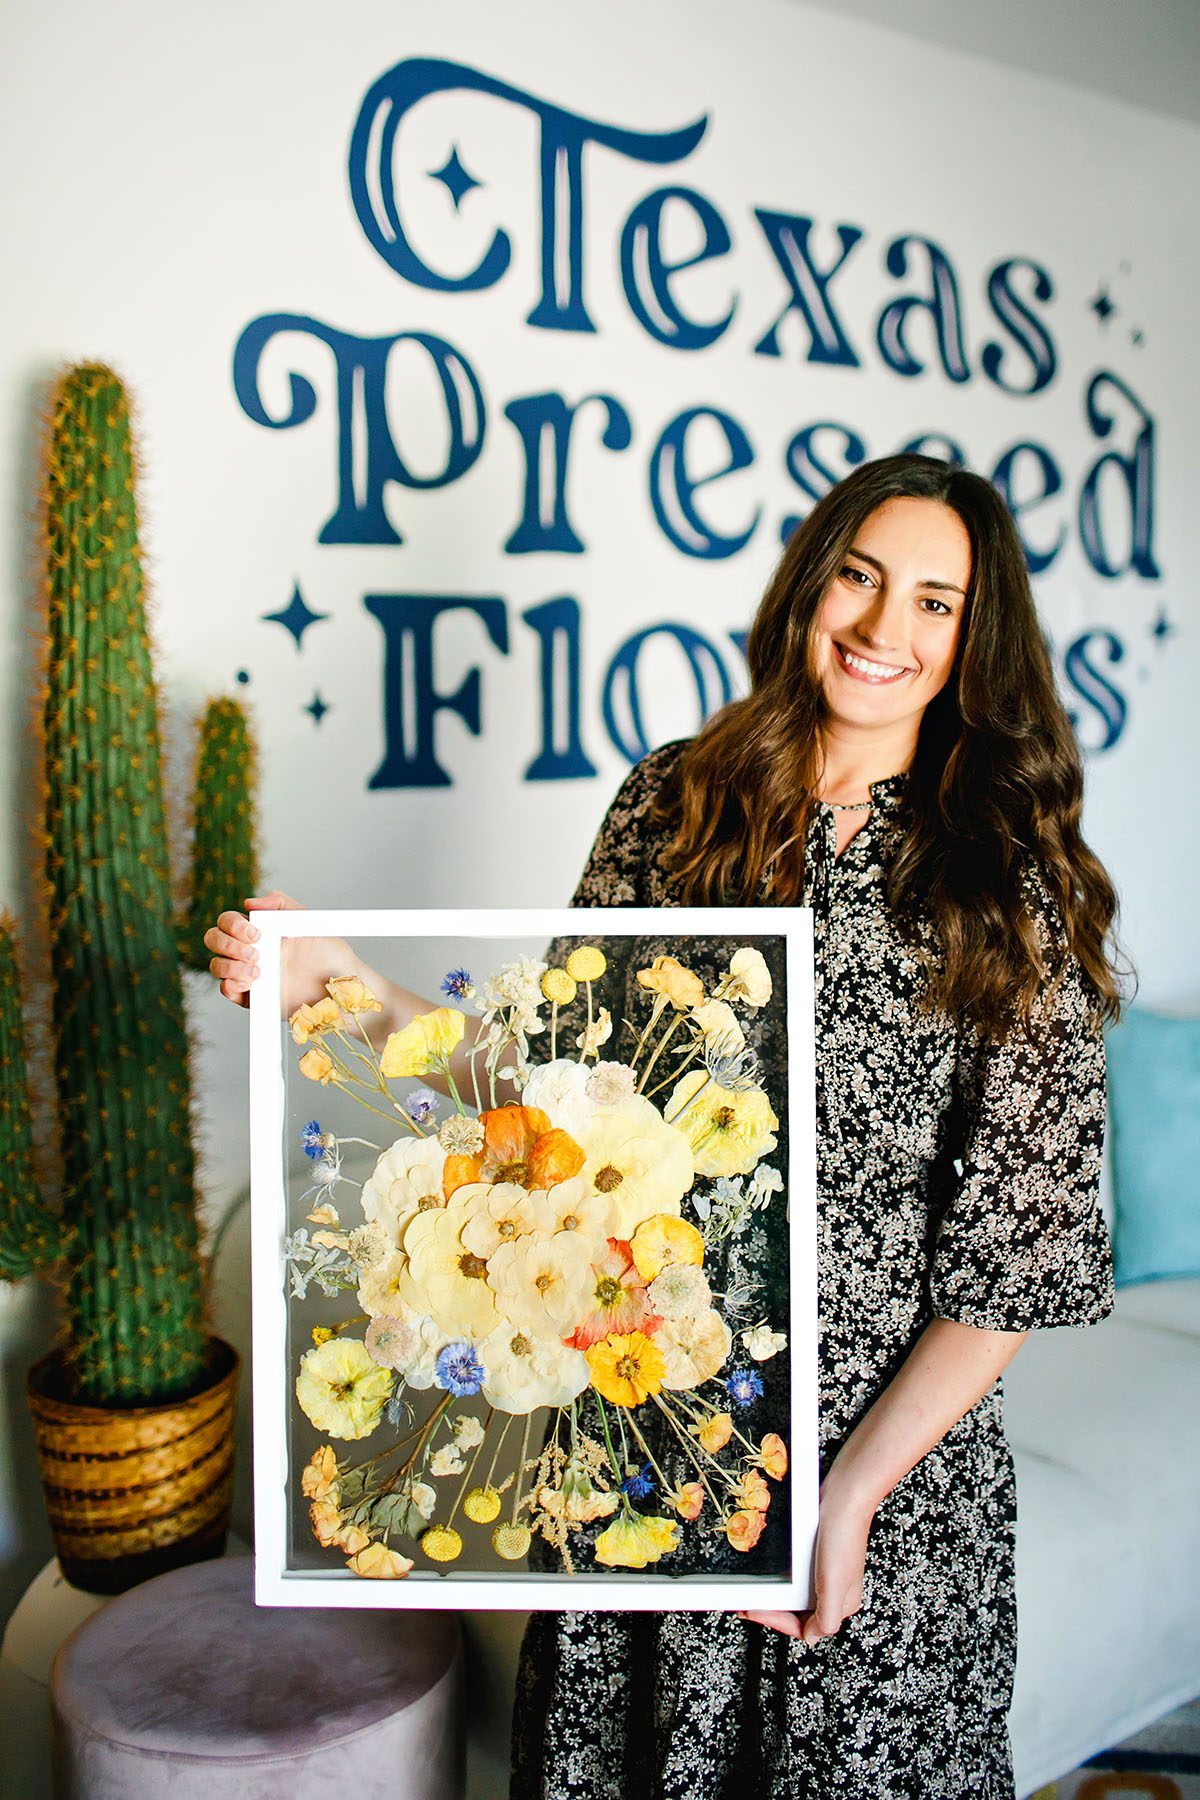 Elissa Gallegos with Texas Pressed Flowers in Dripping Springs, Texas photographed by Lauren Clark, Dripping Springs Realtor